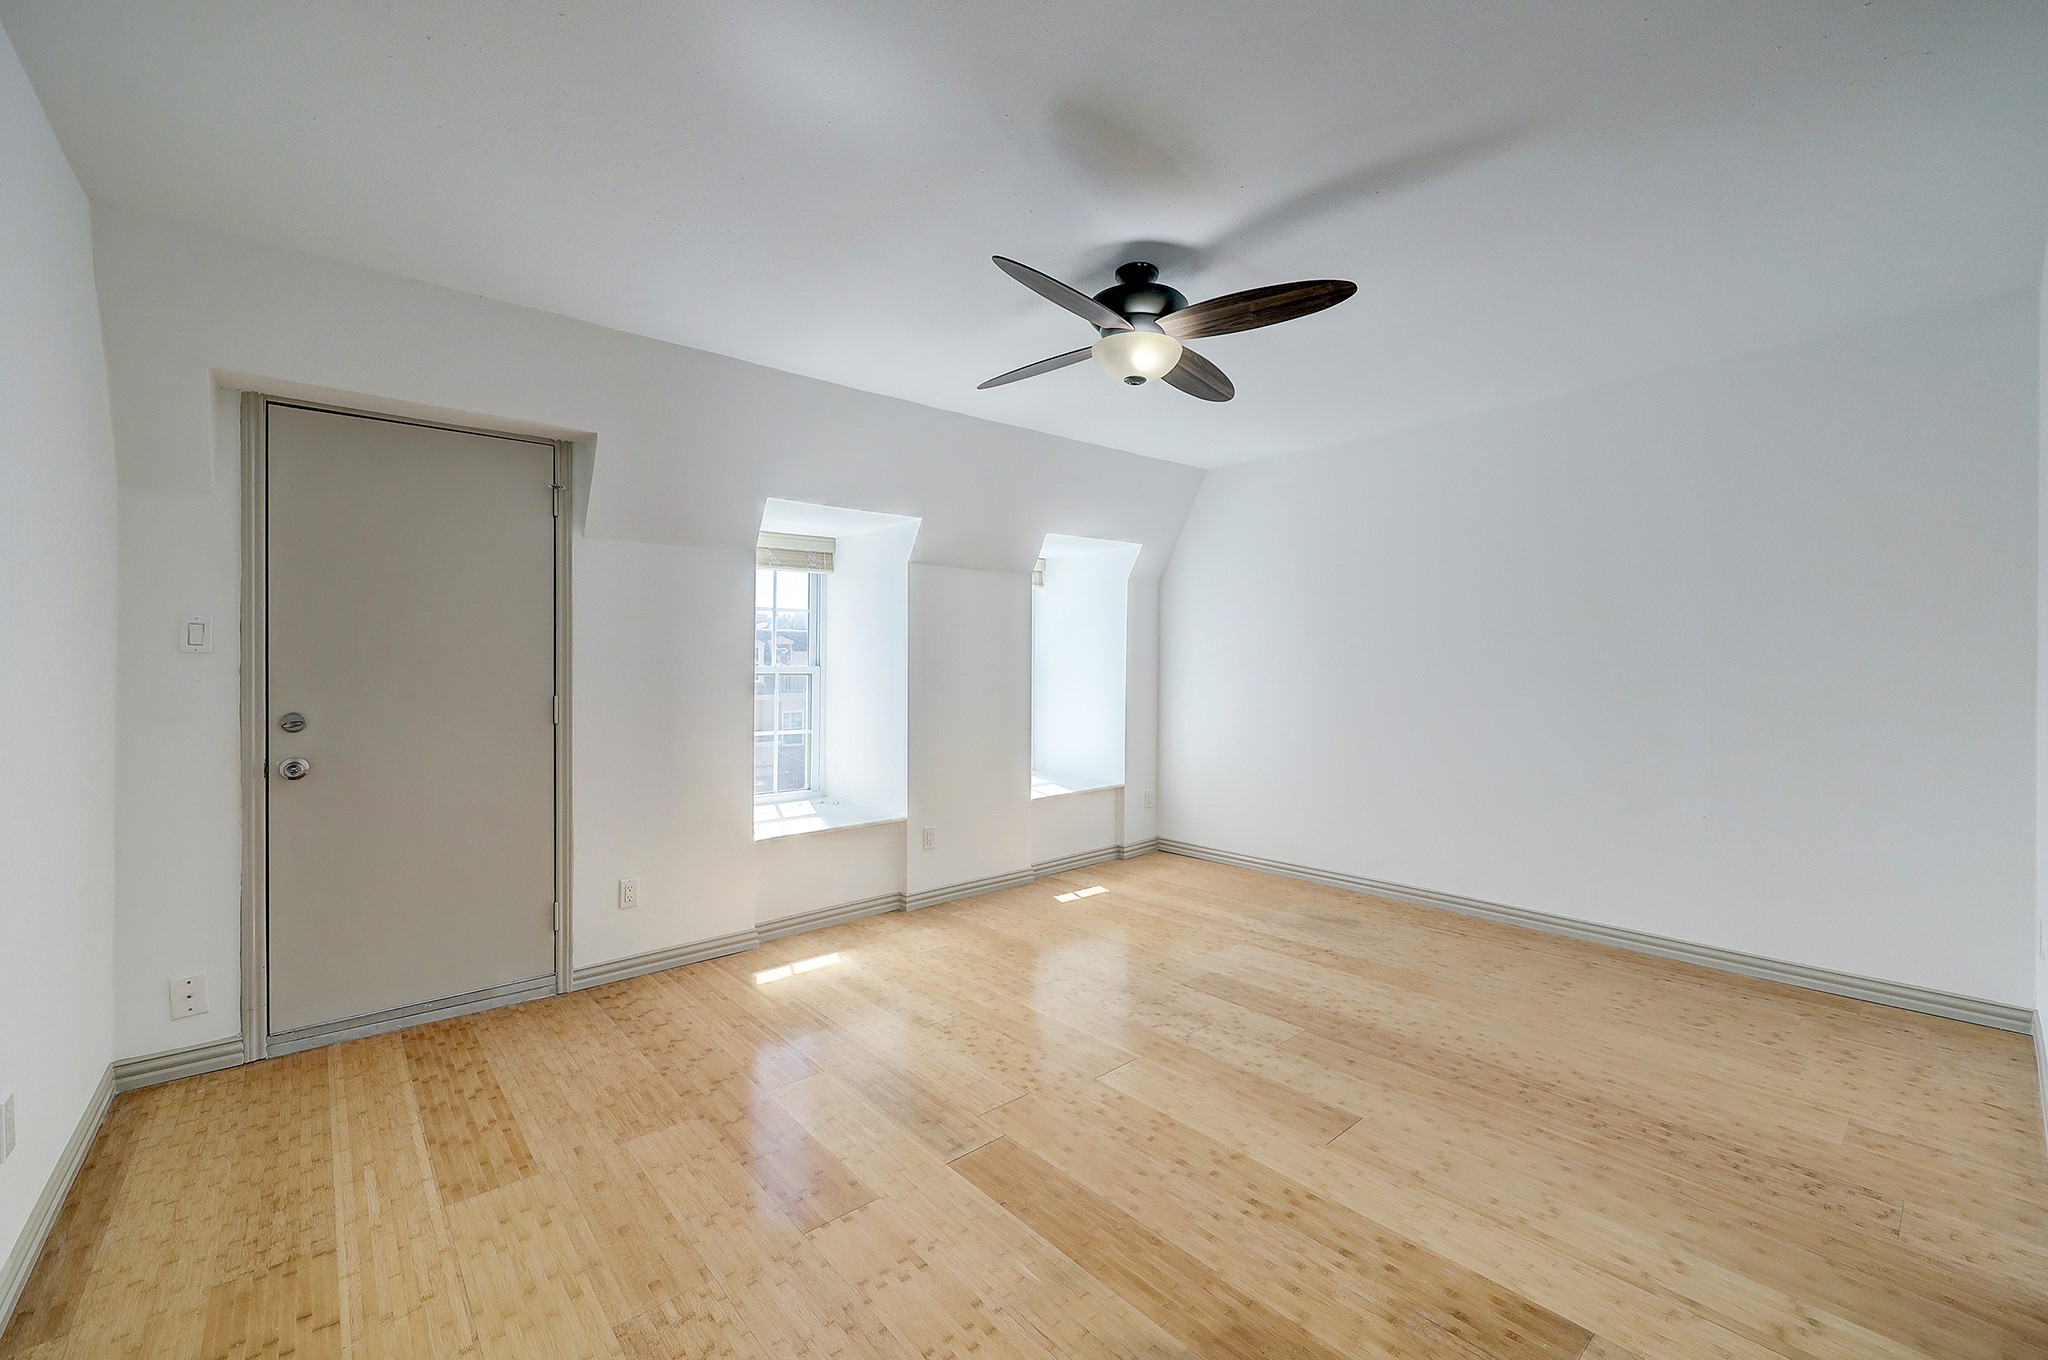 A sizable bedroom offers durable wood-like flooring, and a ceiling fan with light kit. Large windows flood the room with natural light, while the window sitting doubles as storage space. Door pictured on the left offers direct access to a shared balcony space.